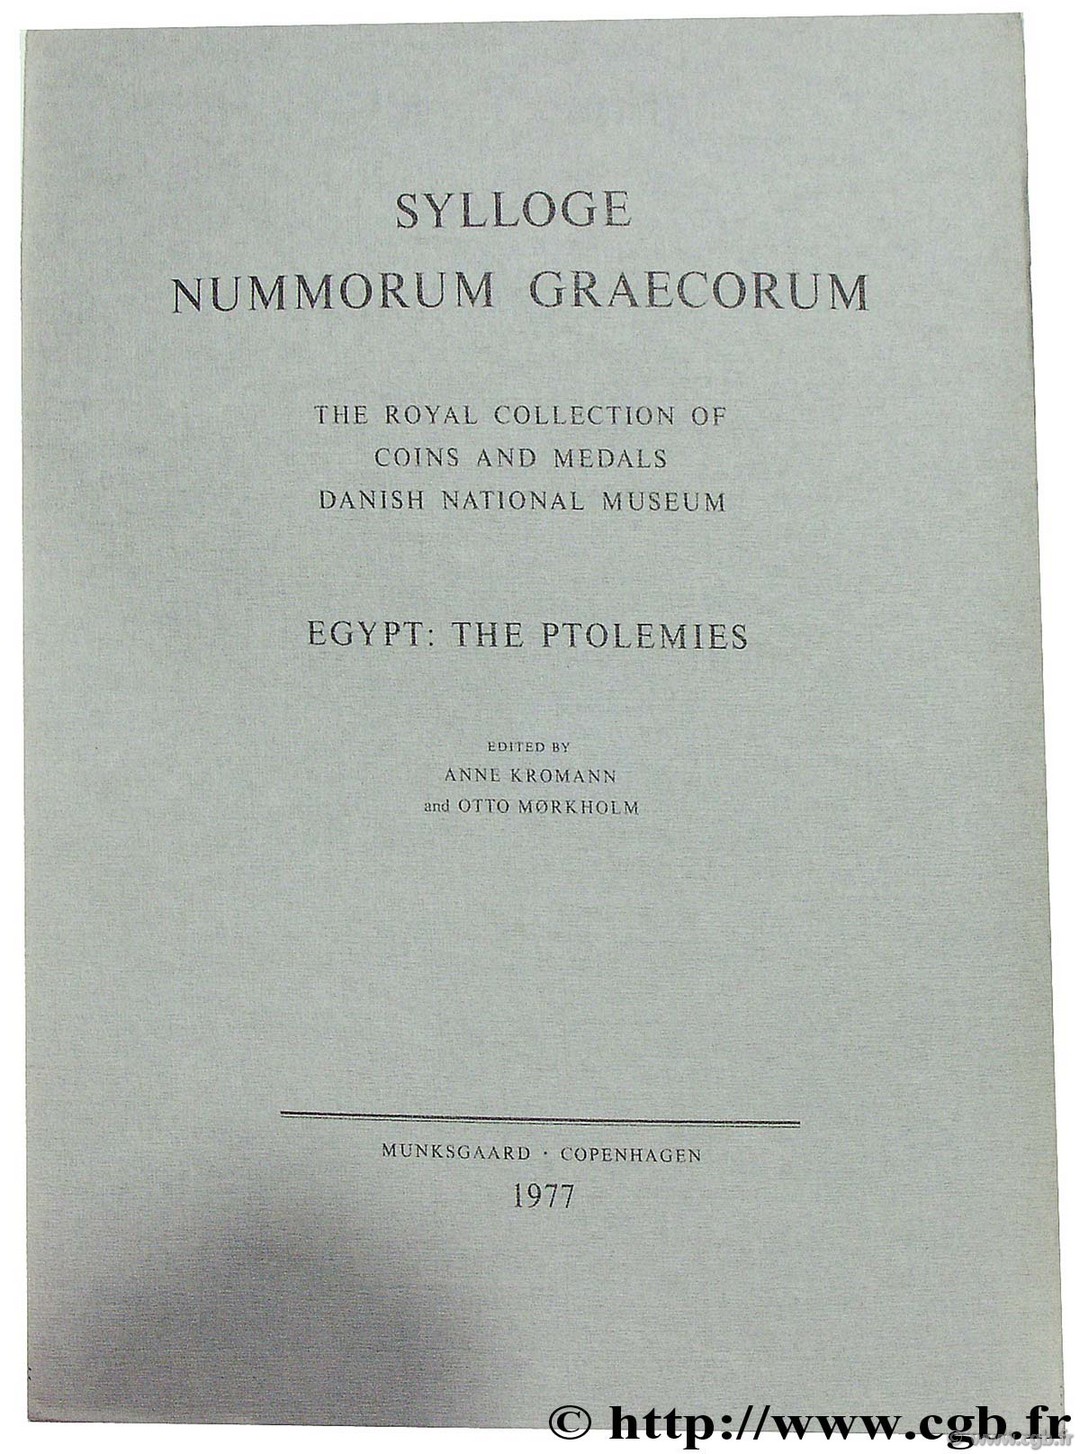 Sylloge Nummorum Graecorum, The Royal Collection of Coins and Medals Danish National Museum, vol. 40, Egypt : the Ptolemies KROMANN A., MORKHOLM O.